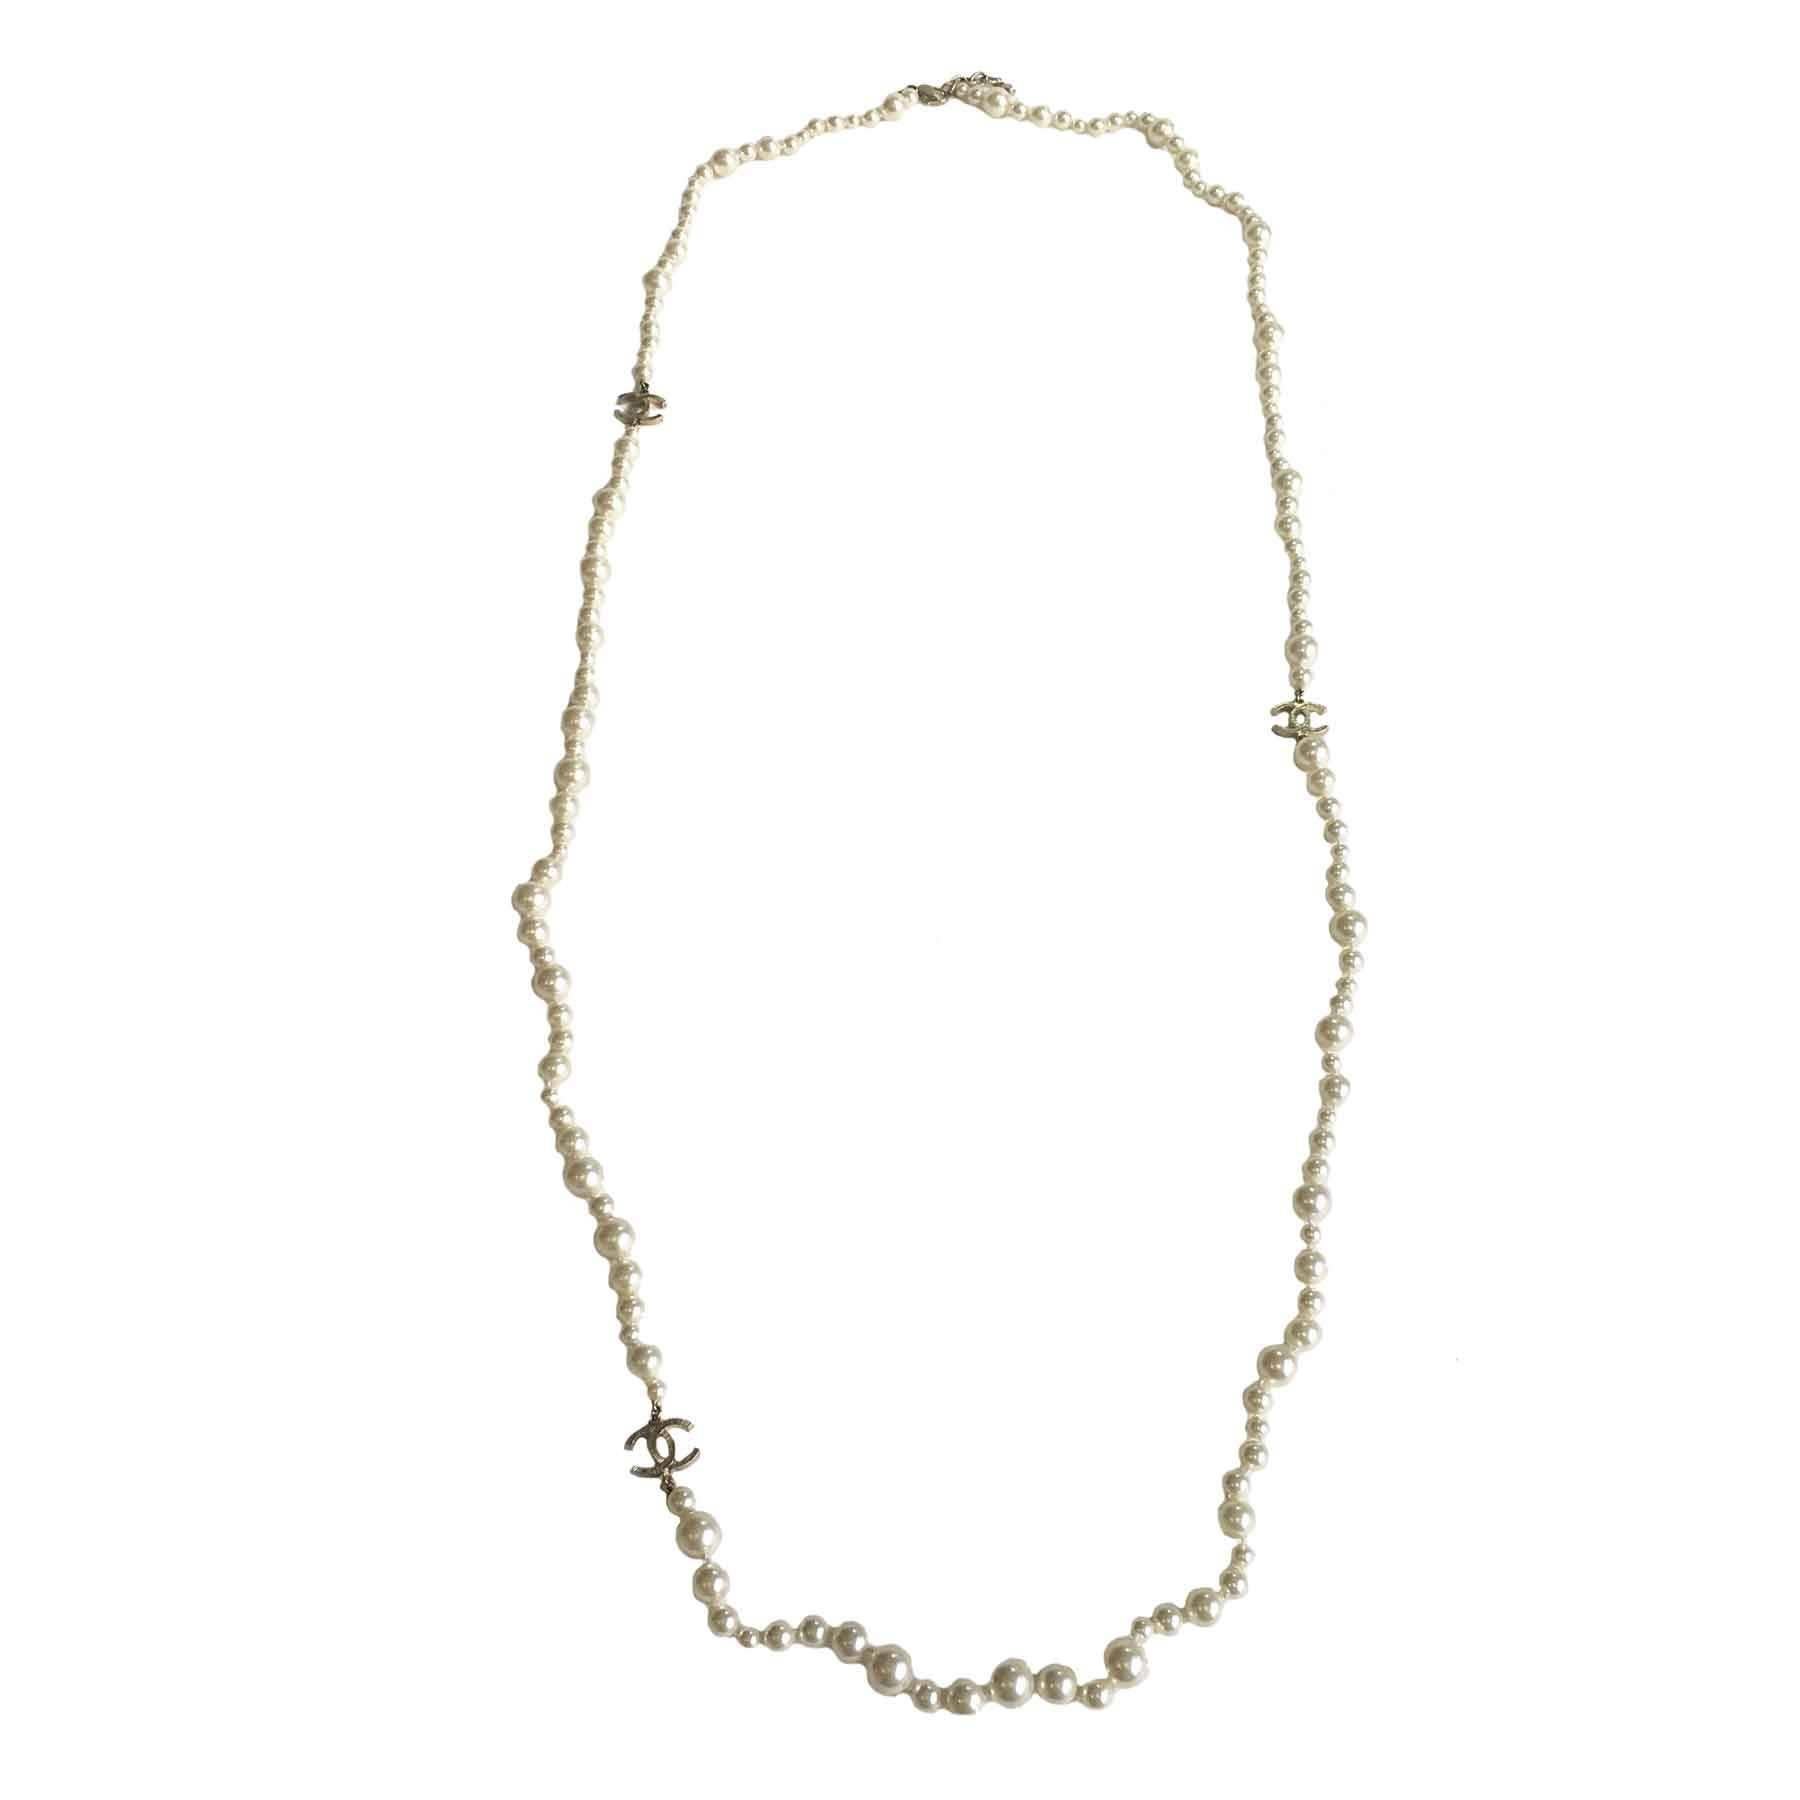 Inescapable jewel, magnificent Chanel long necklace of pearly pearls and golden metal CC.

Collection 2004.

Dimensions(Size): length at the 1st ring : 171 cms.

Delivered in a bag Valois Vintage Paris.